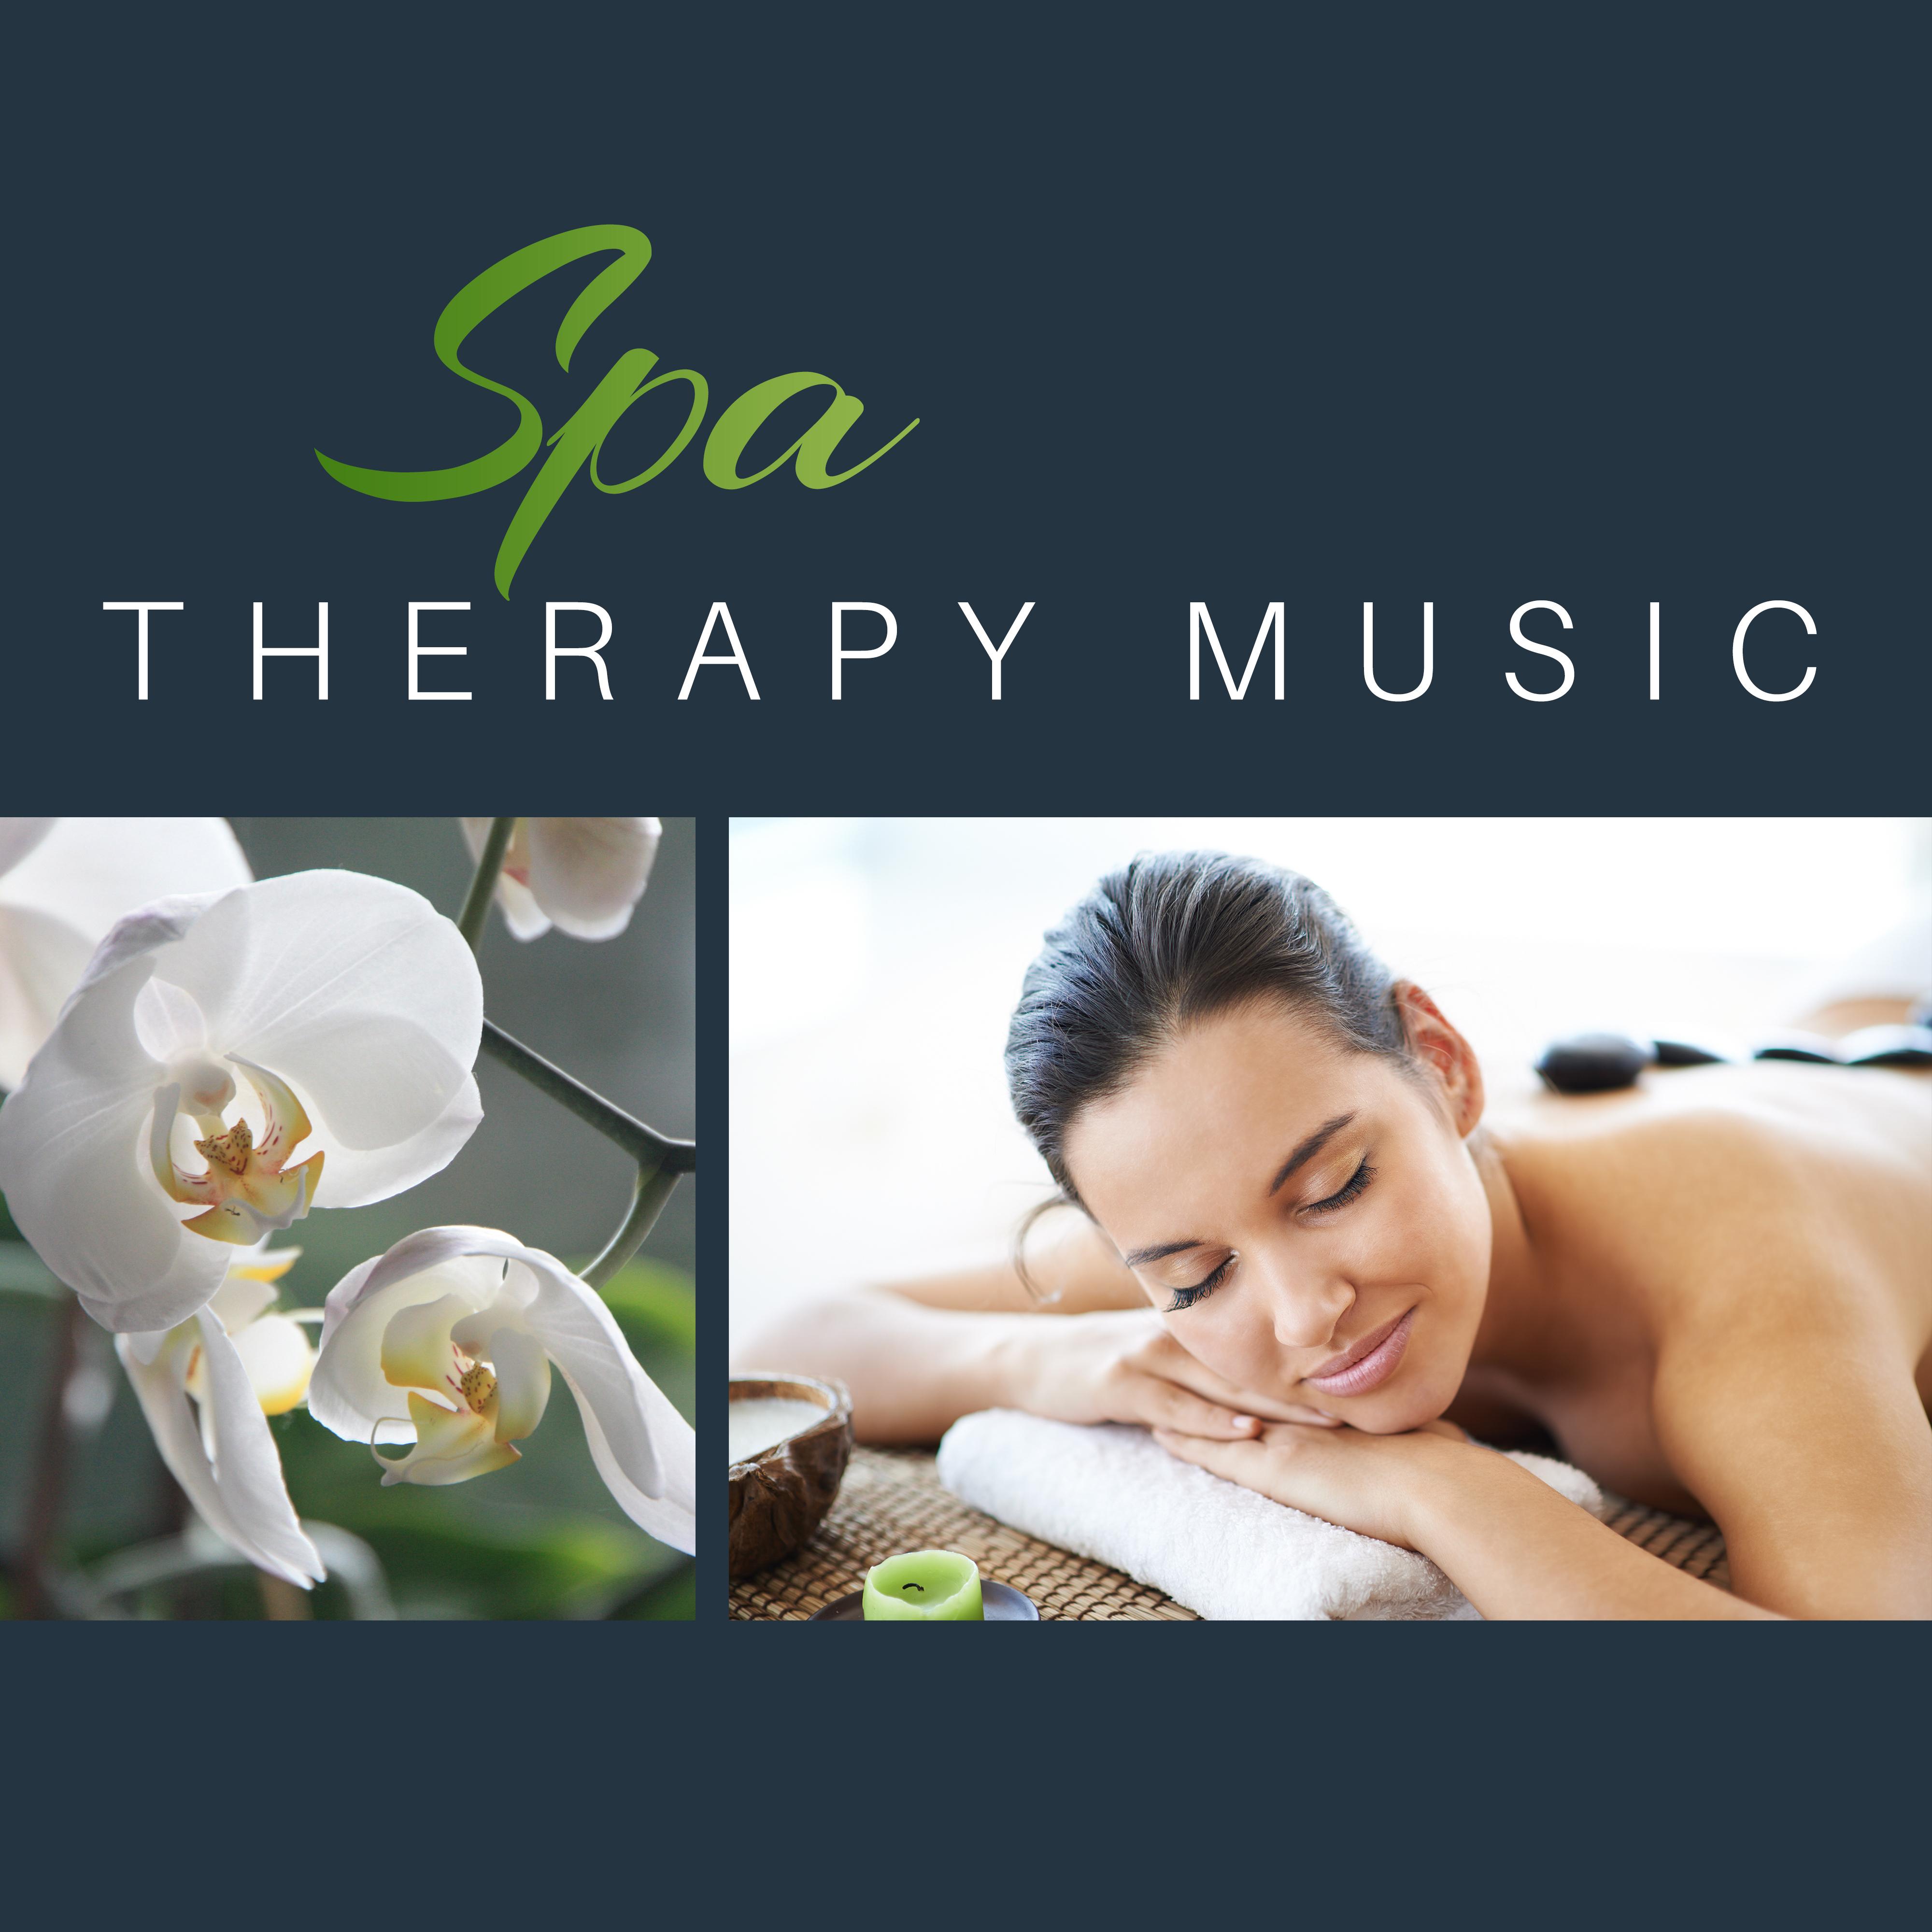 Spa Therapy Music – Relaxing Music, Full of Natural Sounds, Pure Relaxation, Calmness